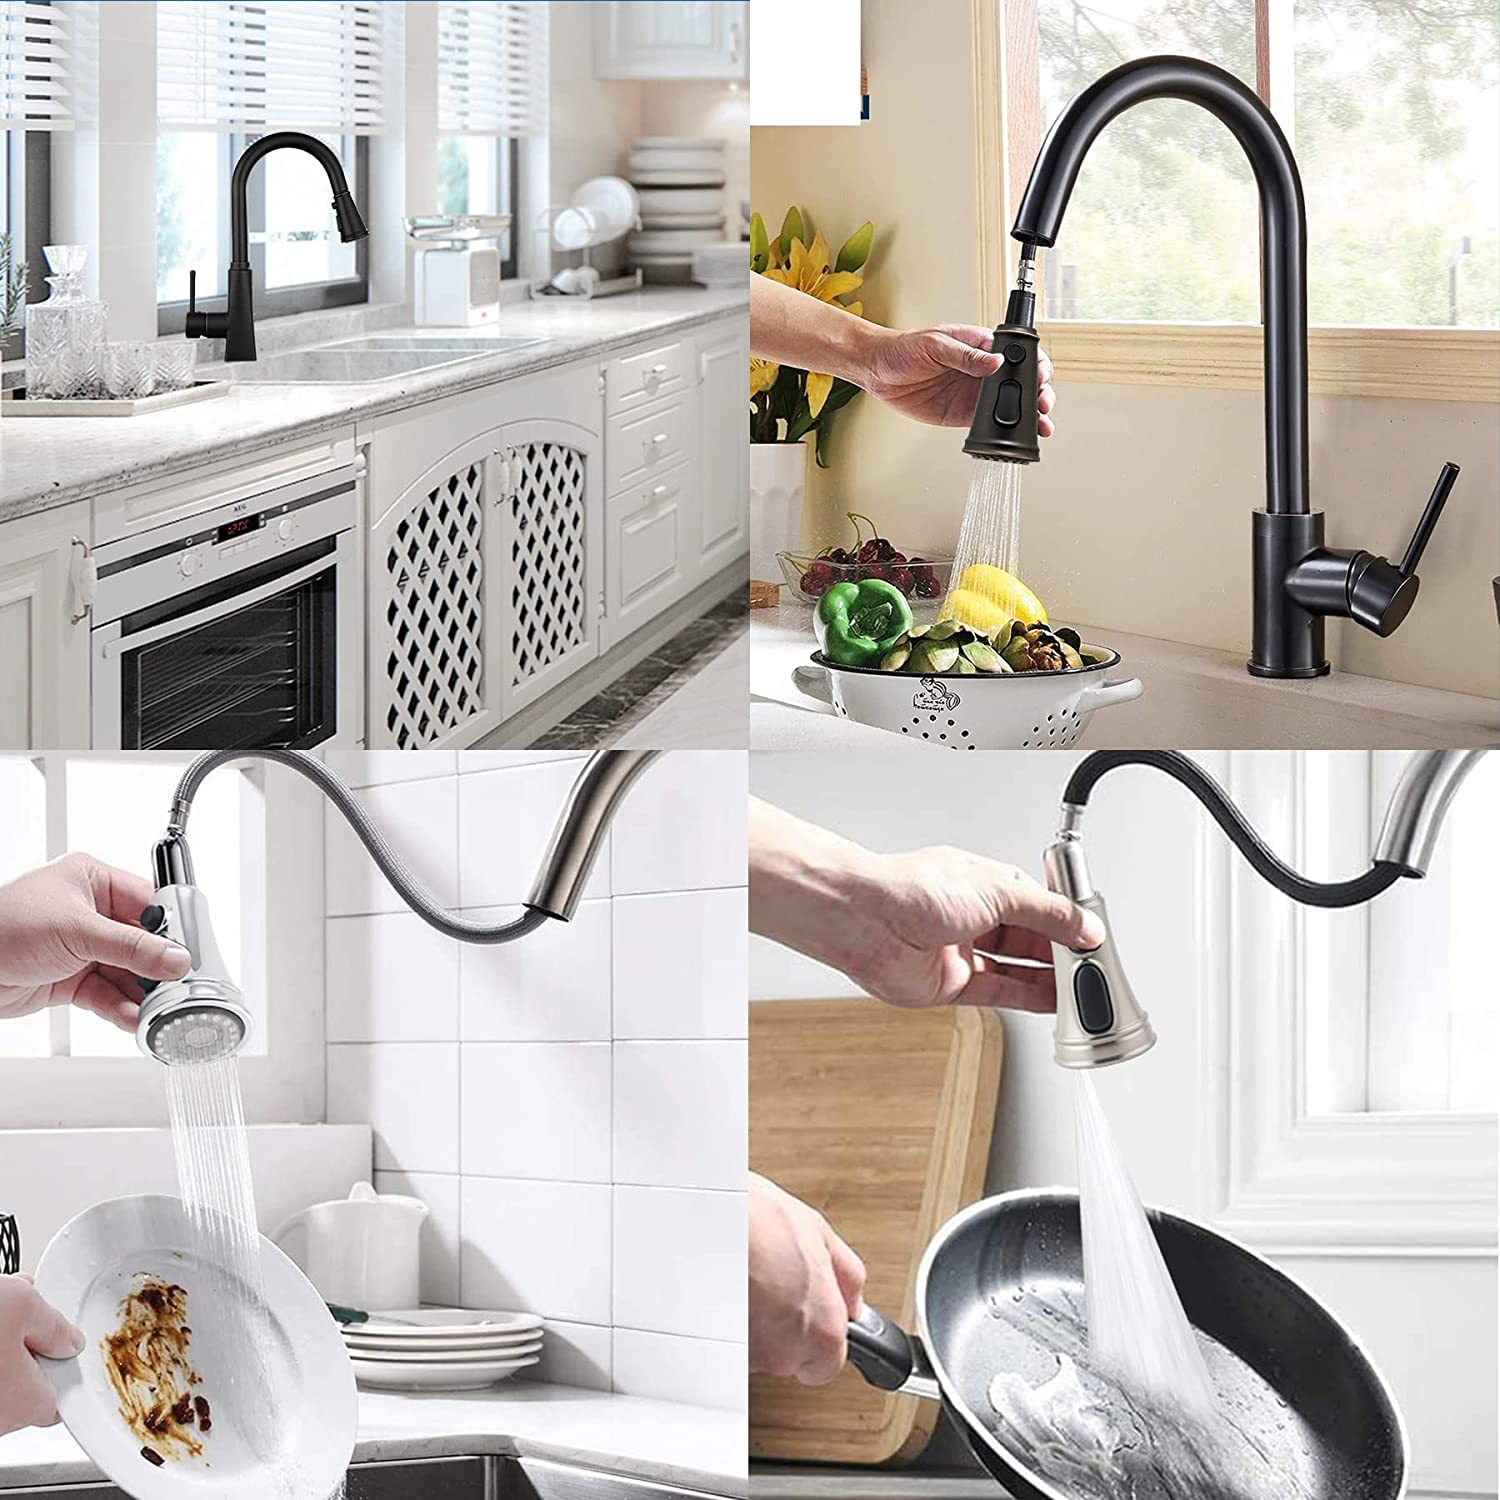 Hibbent 龙头配件 Hibbent Kitchen Faucet Head Replacement Pull Down Faucet Spray Head, 3 Function Faucet Sprayer Nozzle with 9 Adapters Compatible with Moen, American Standard, Delta, Kohler Faucets